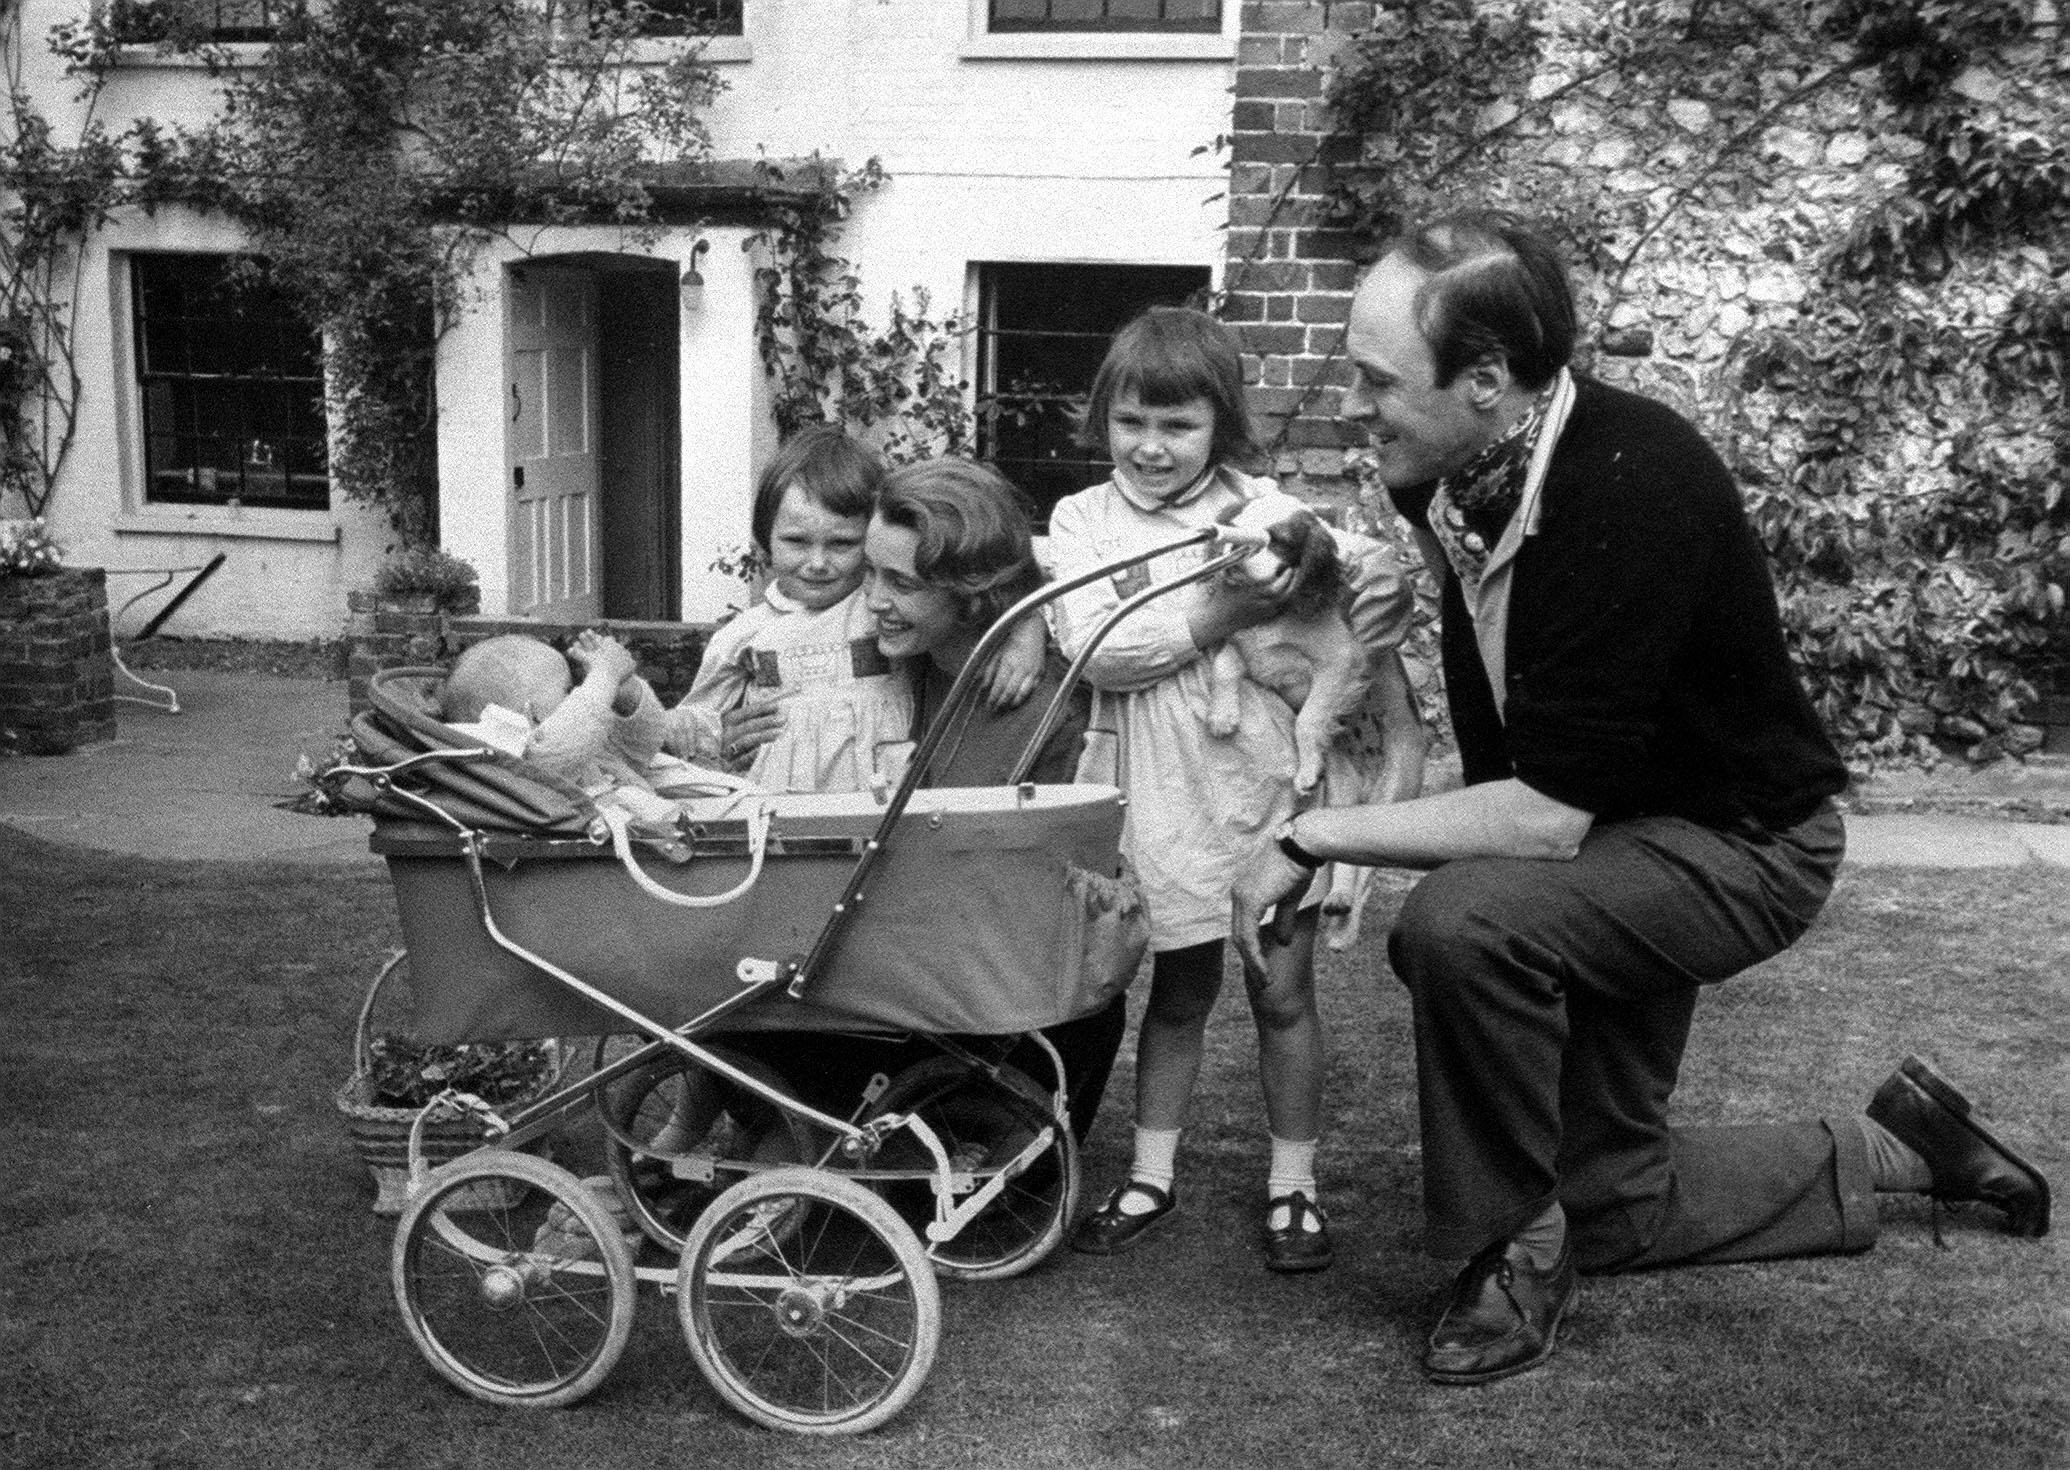 A family photograph of the children's author Roald Dahl, with his wife Patricia Neal, and children Olivia (right) Tessa, and Theo (in pram). 13th SEPTEMBER: Roald Dahl was born on this day in 1916. Ref #: PA.1172975 Date: 01/01/1961